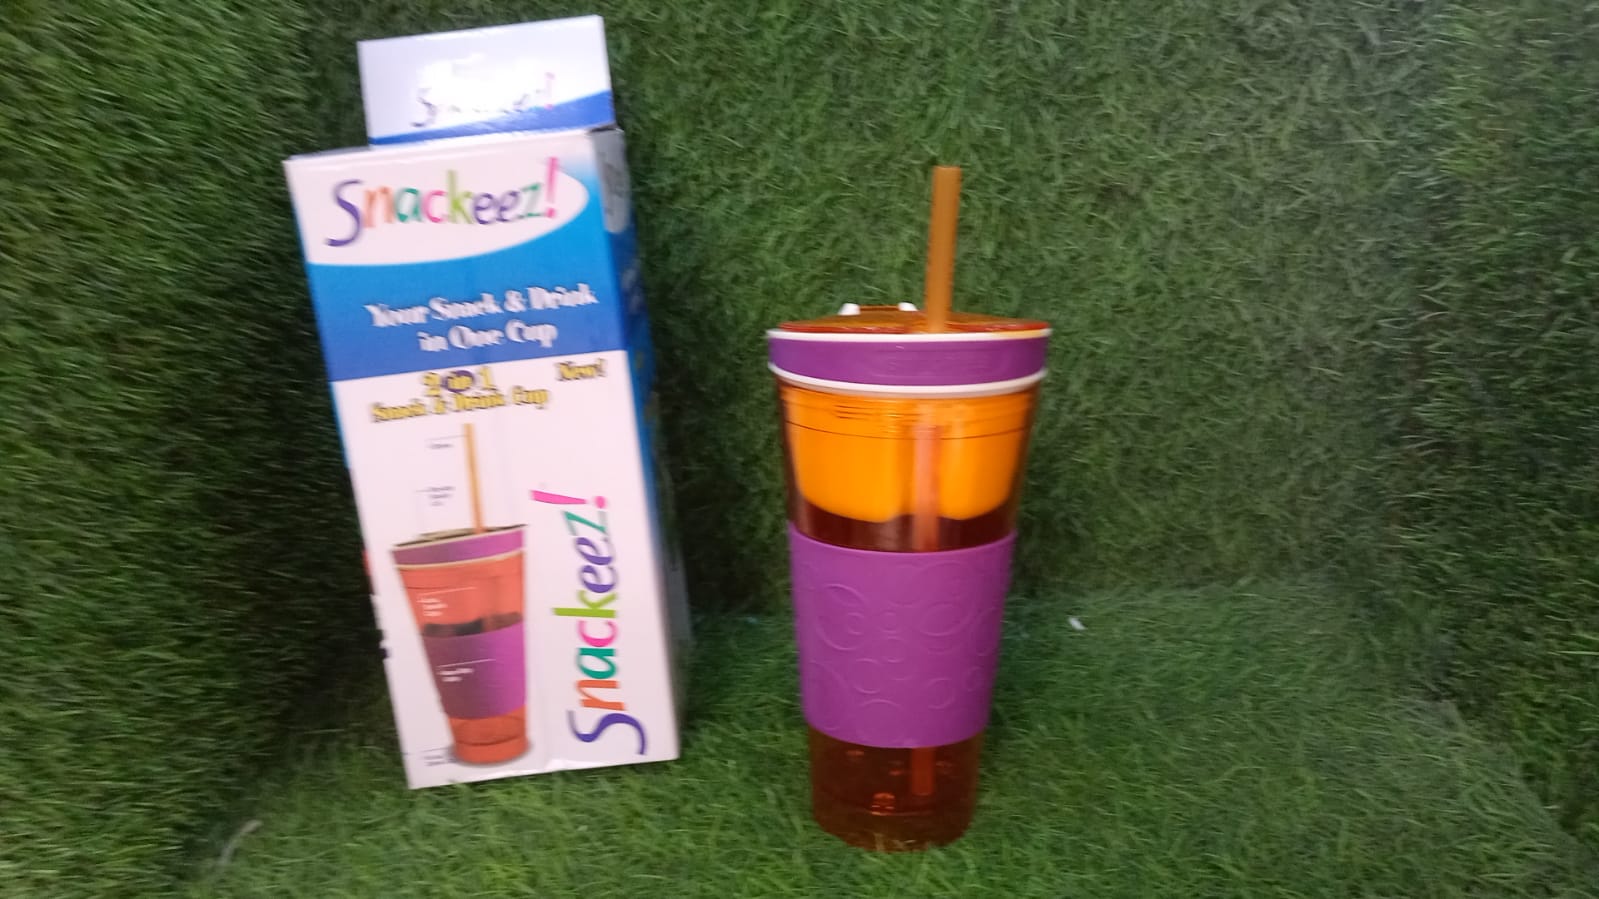 2 in 1 Snack & Drink Snackeez Travel Cup in One Container (1pc)